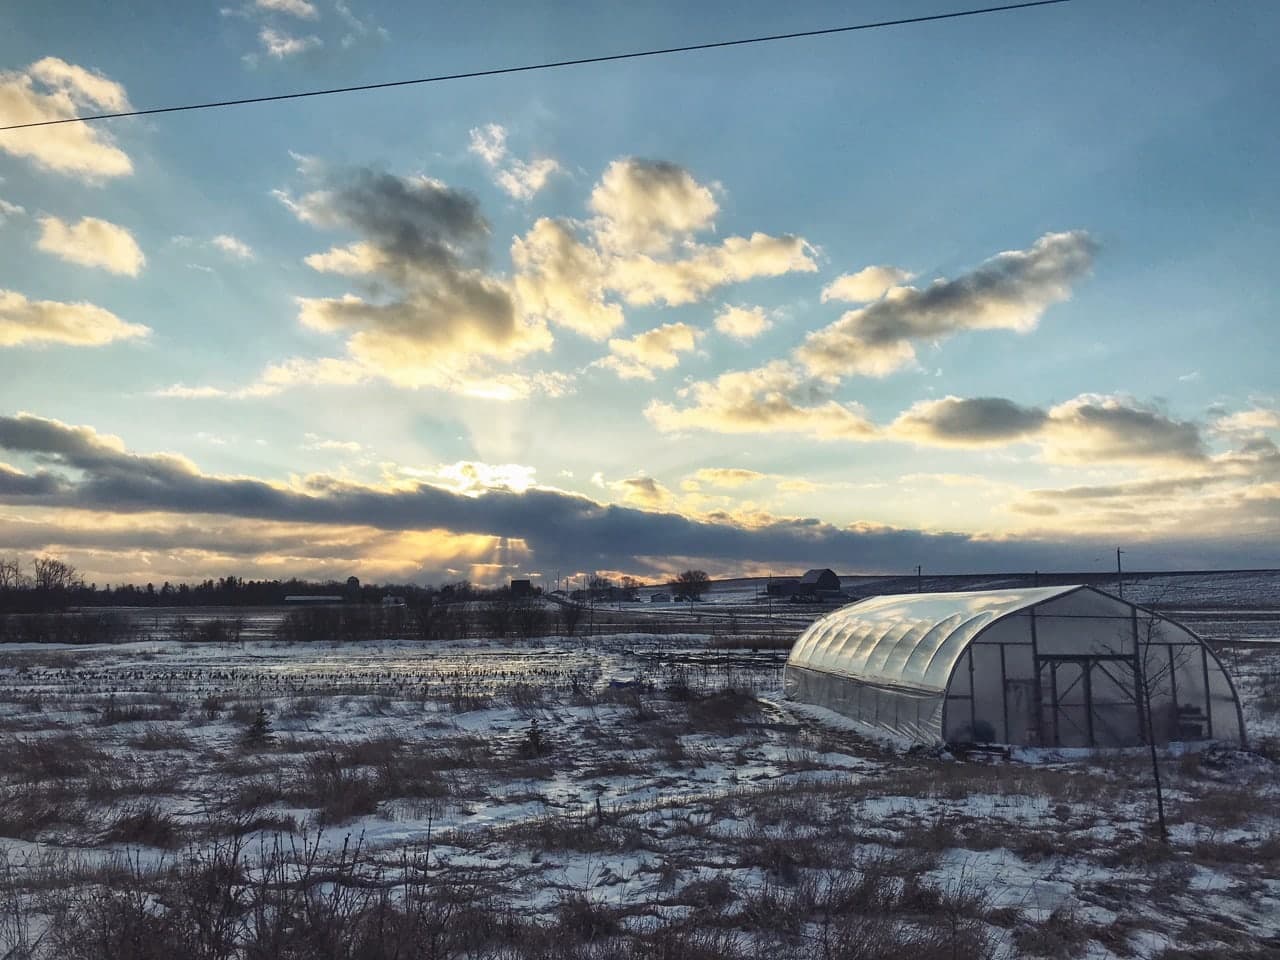 Icy Greenhouse - 2020 CSA Registration Open, Some Changes Afoot